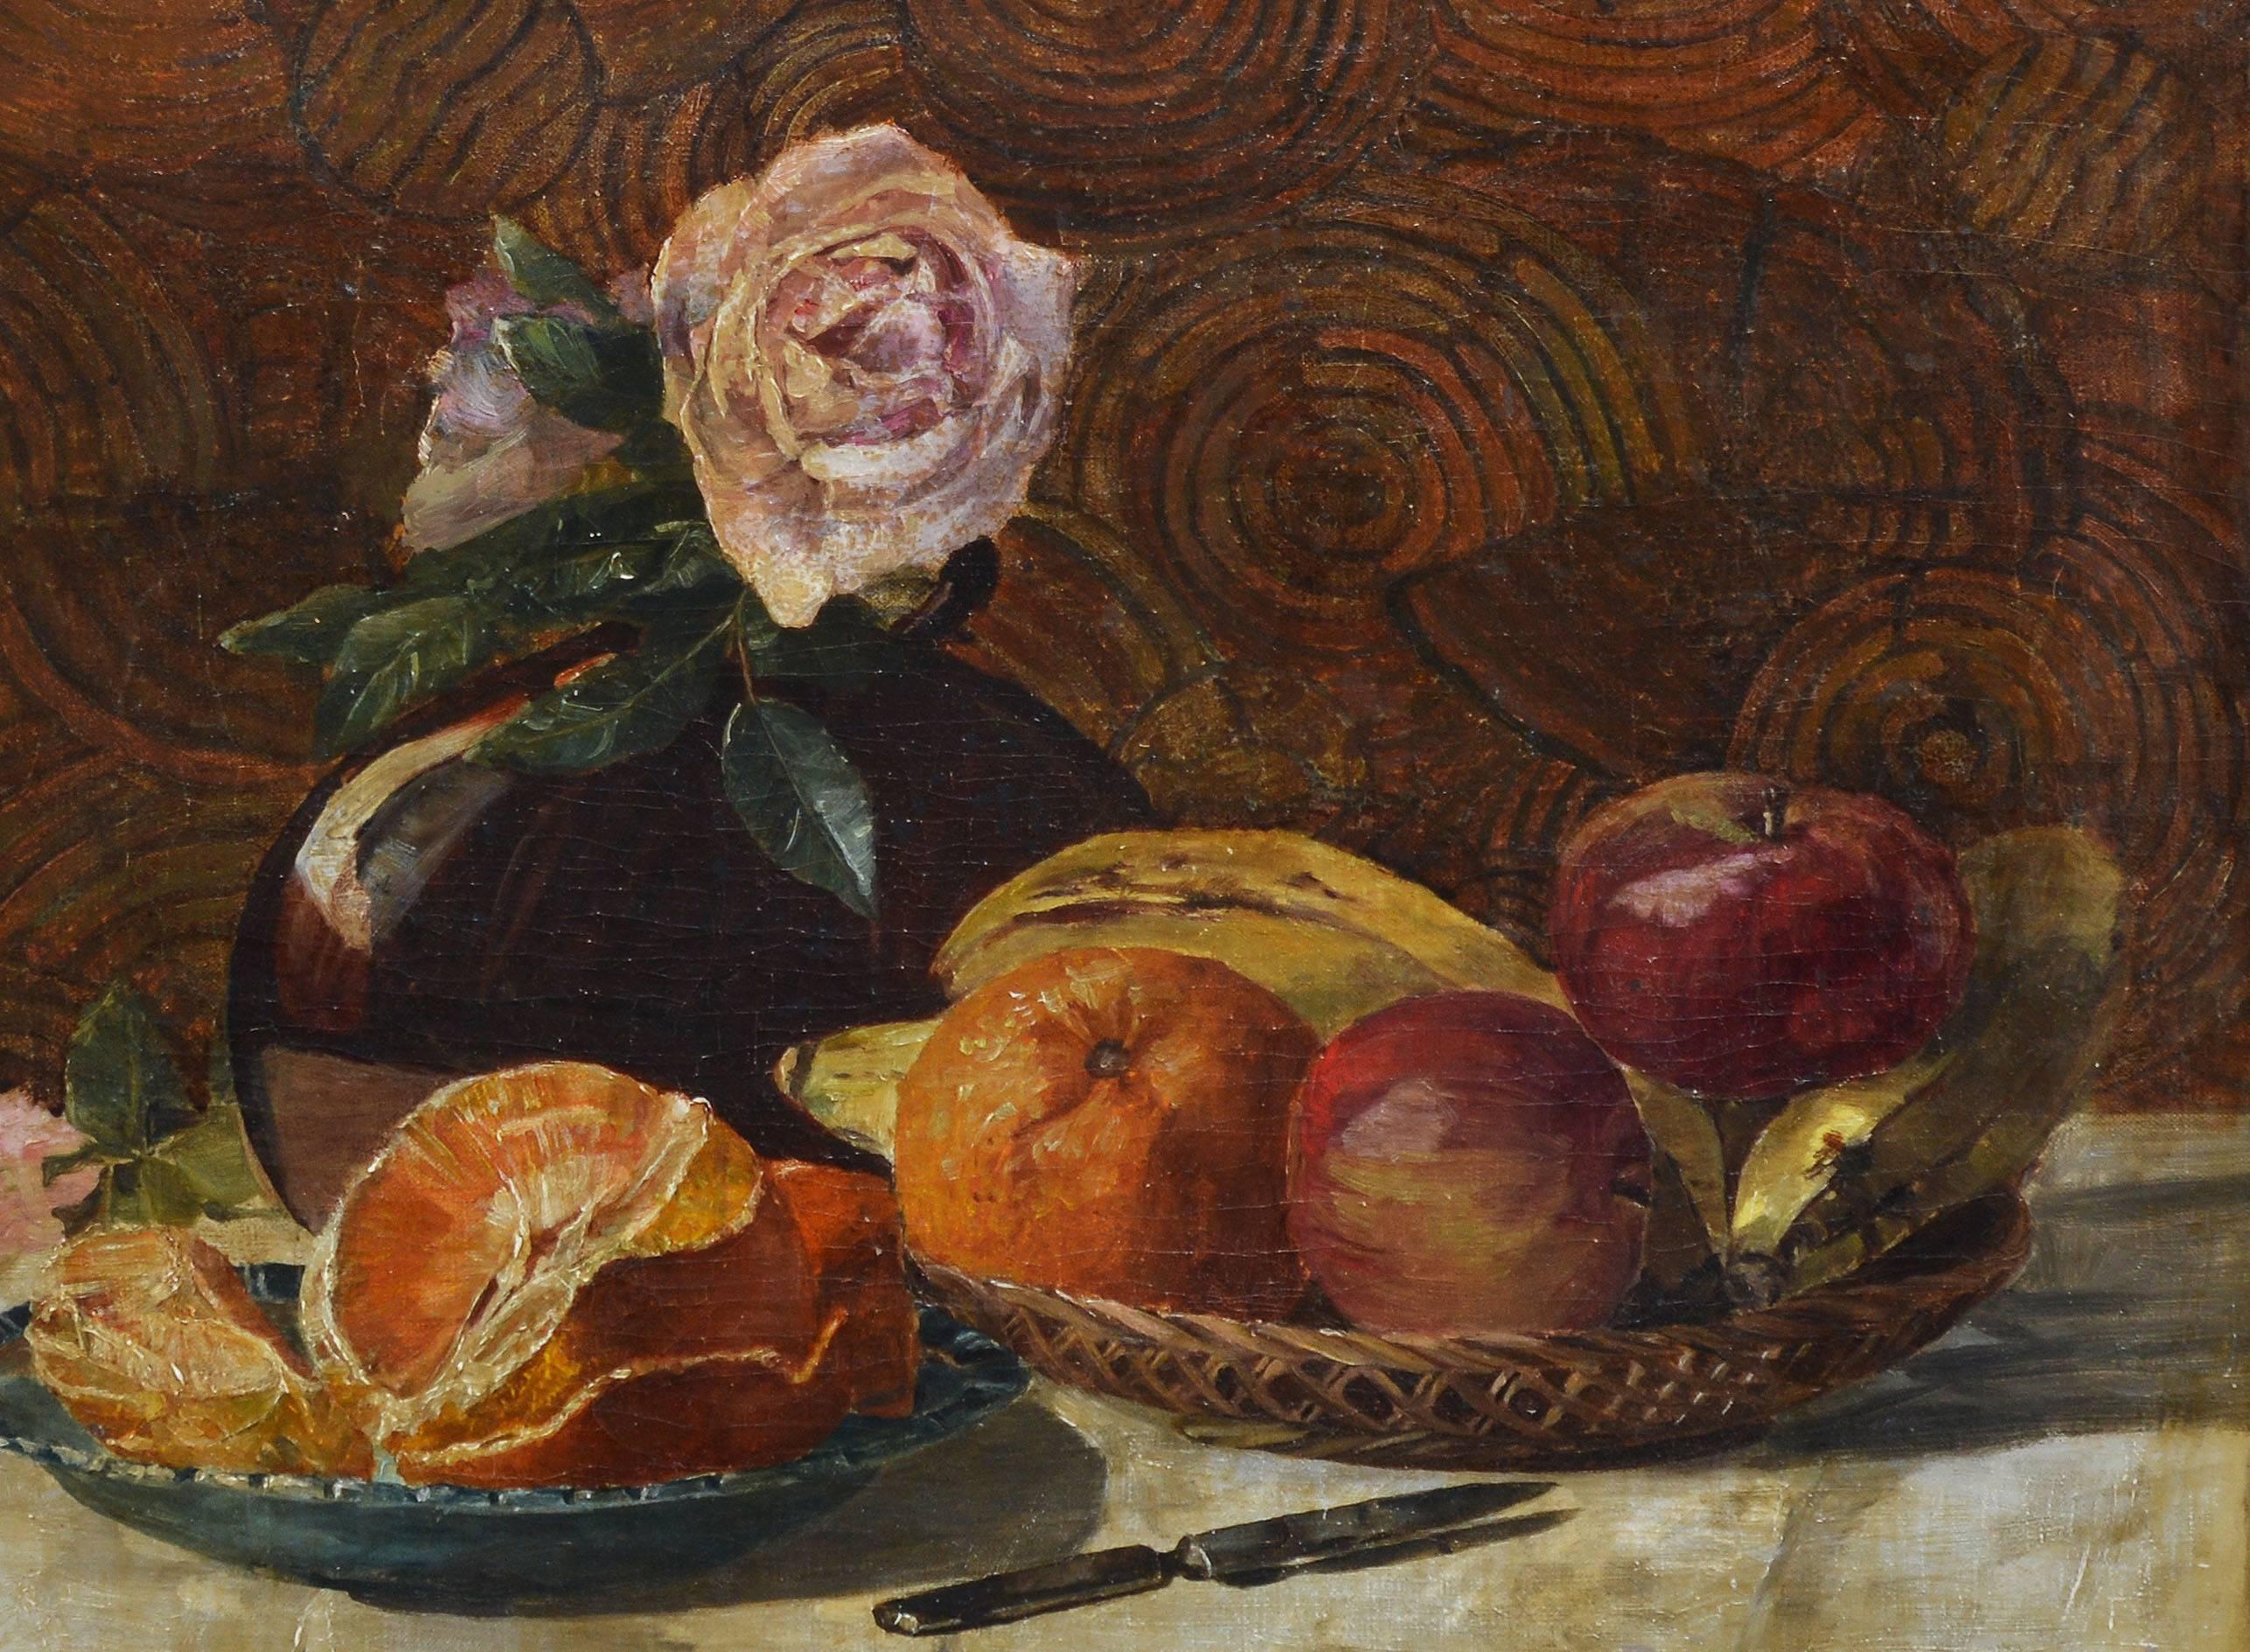 Modernist fruit and flower still life oil painting.  Oil on canvas, circa 1890.  Unsigned.  Displayed in a period giltwood frame.   Image size, 18